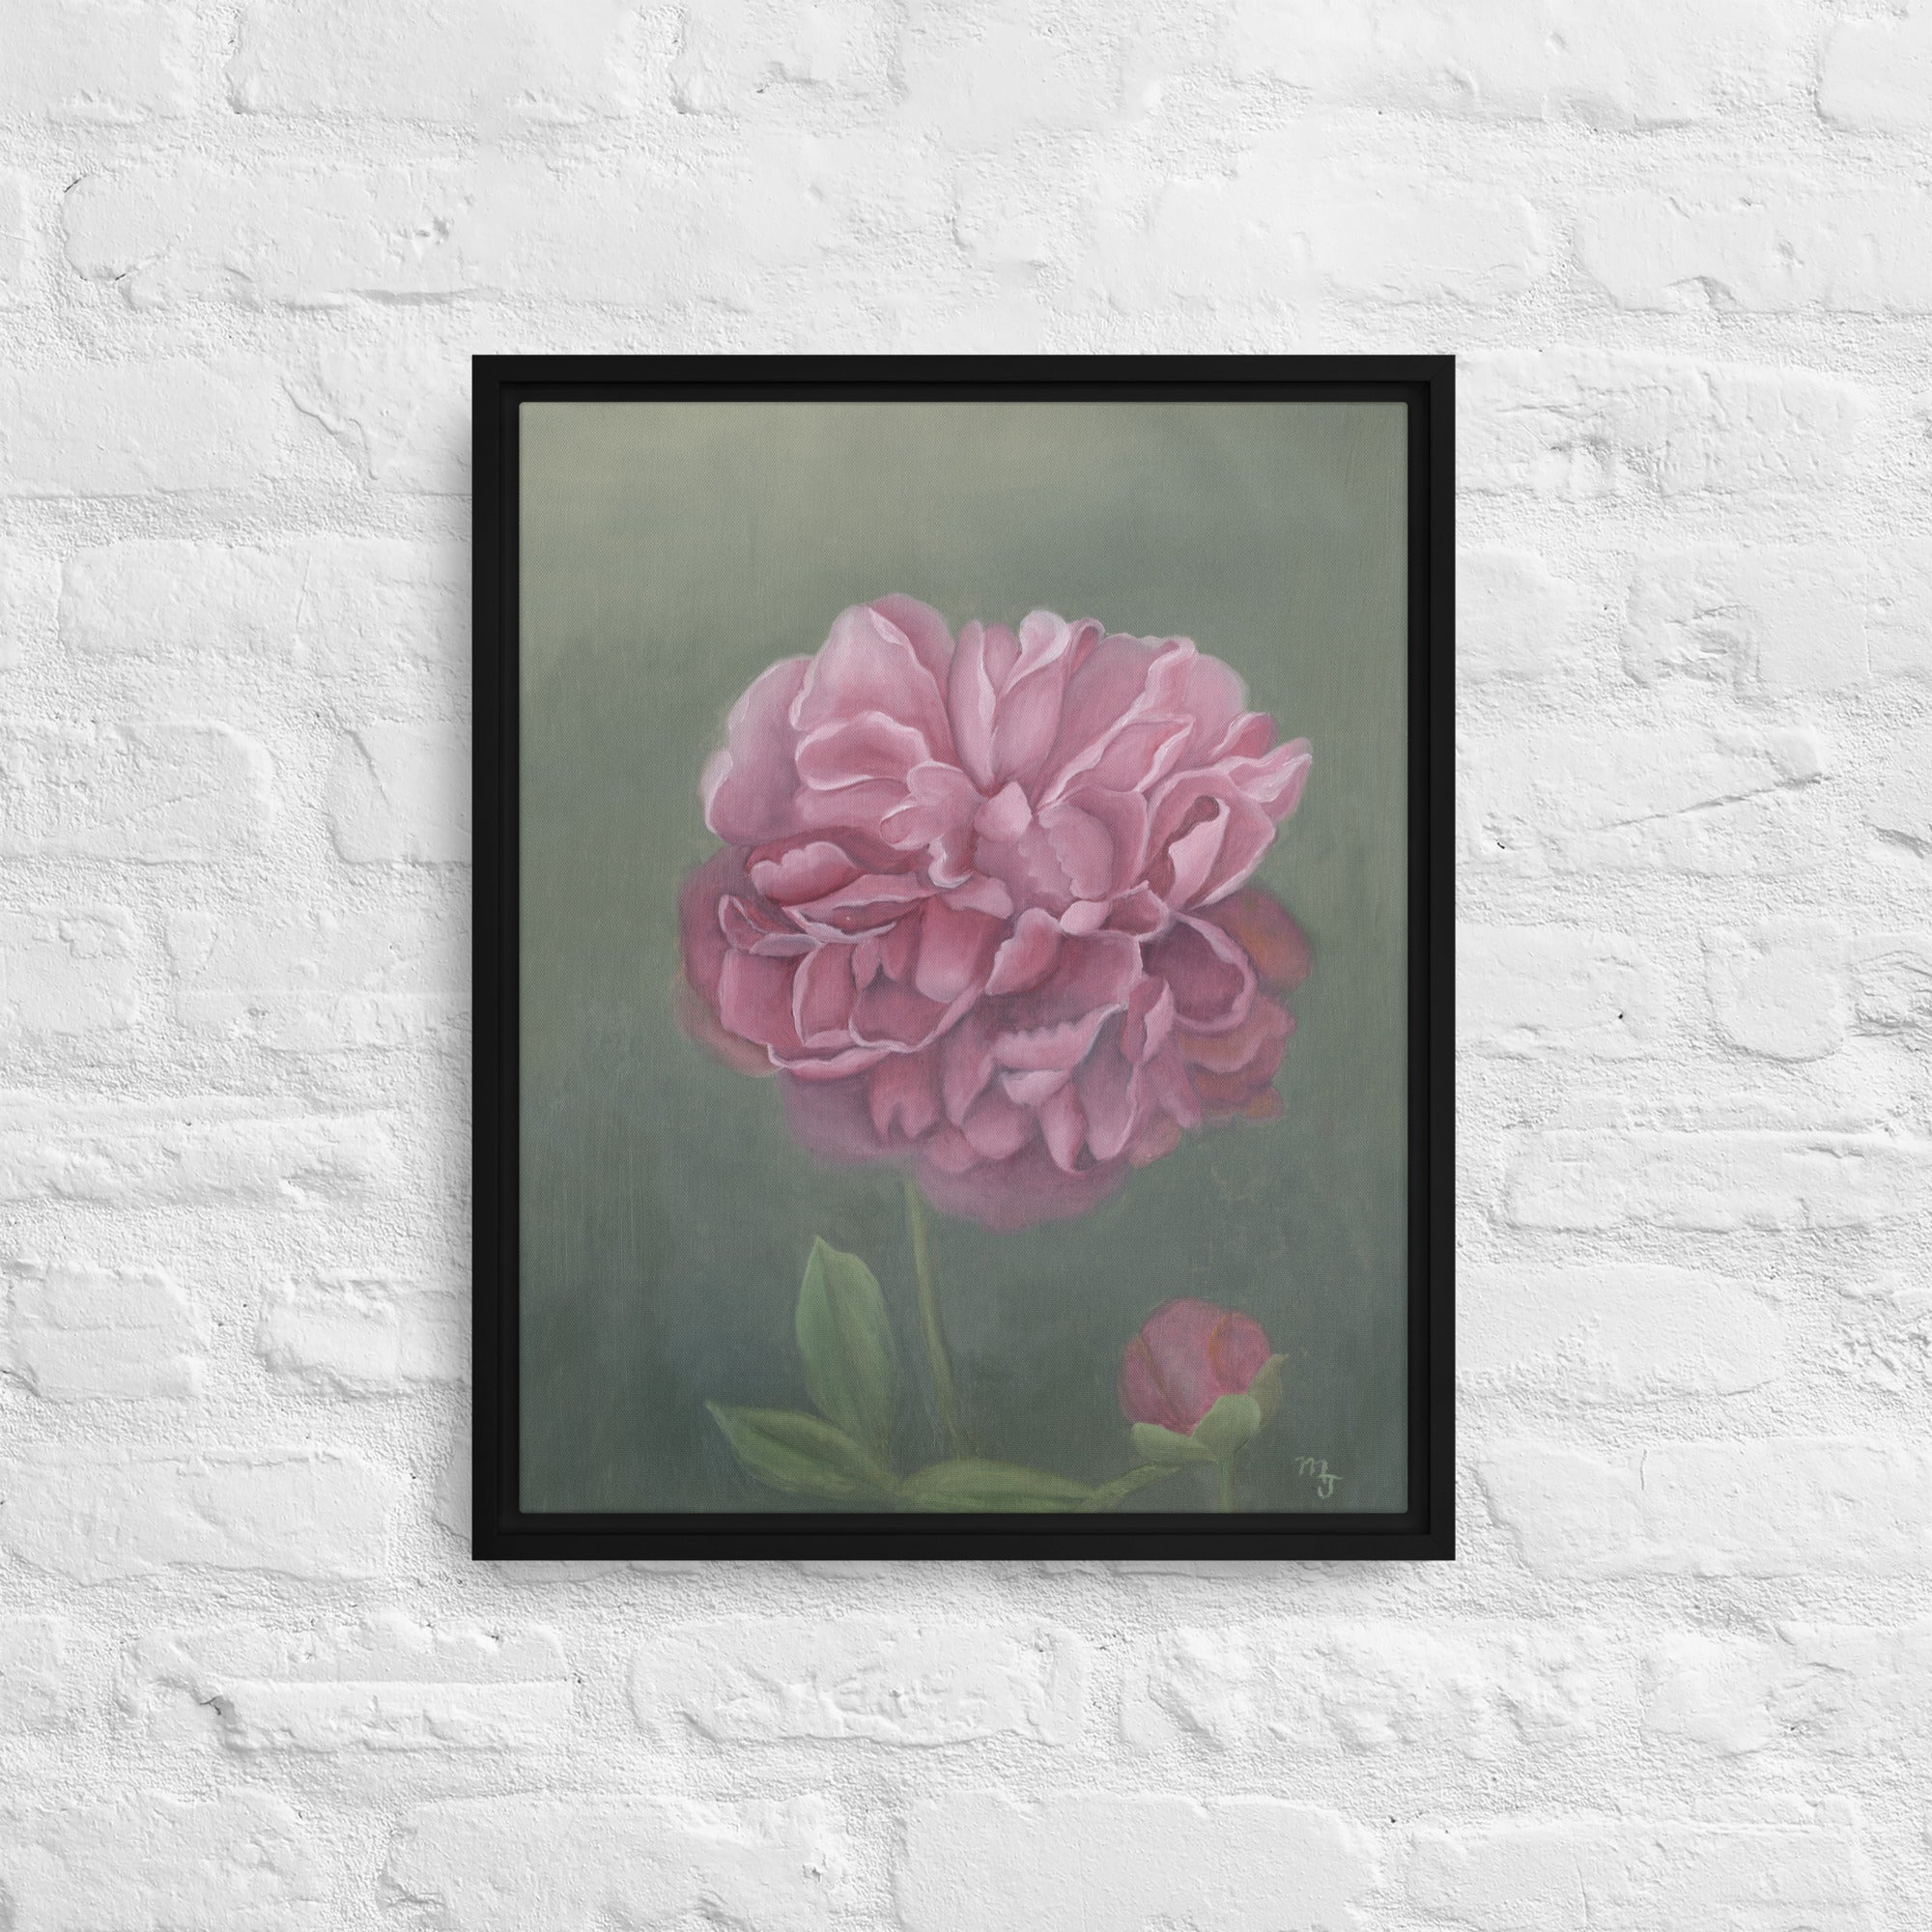 Peony oil painting - 16”x20” framed canvas